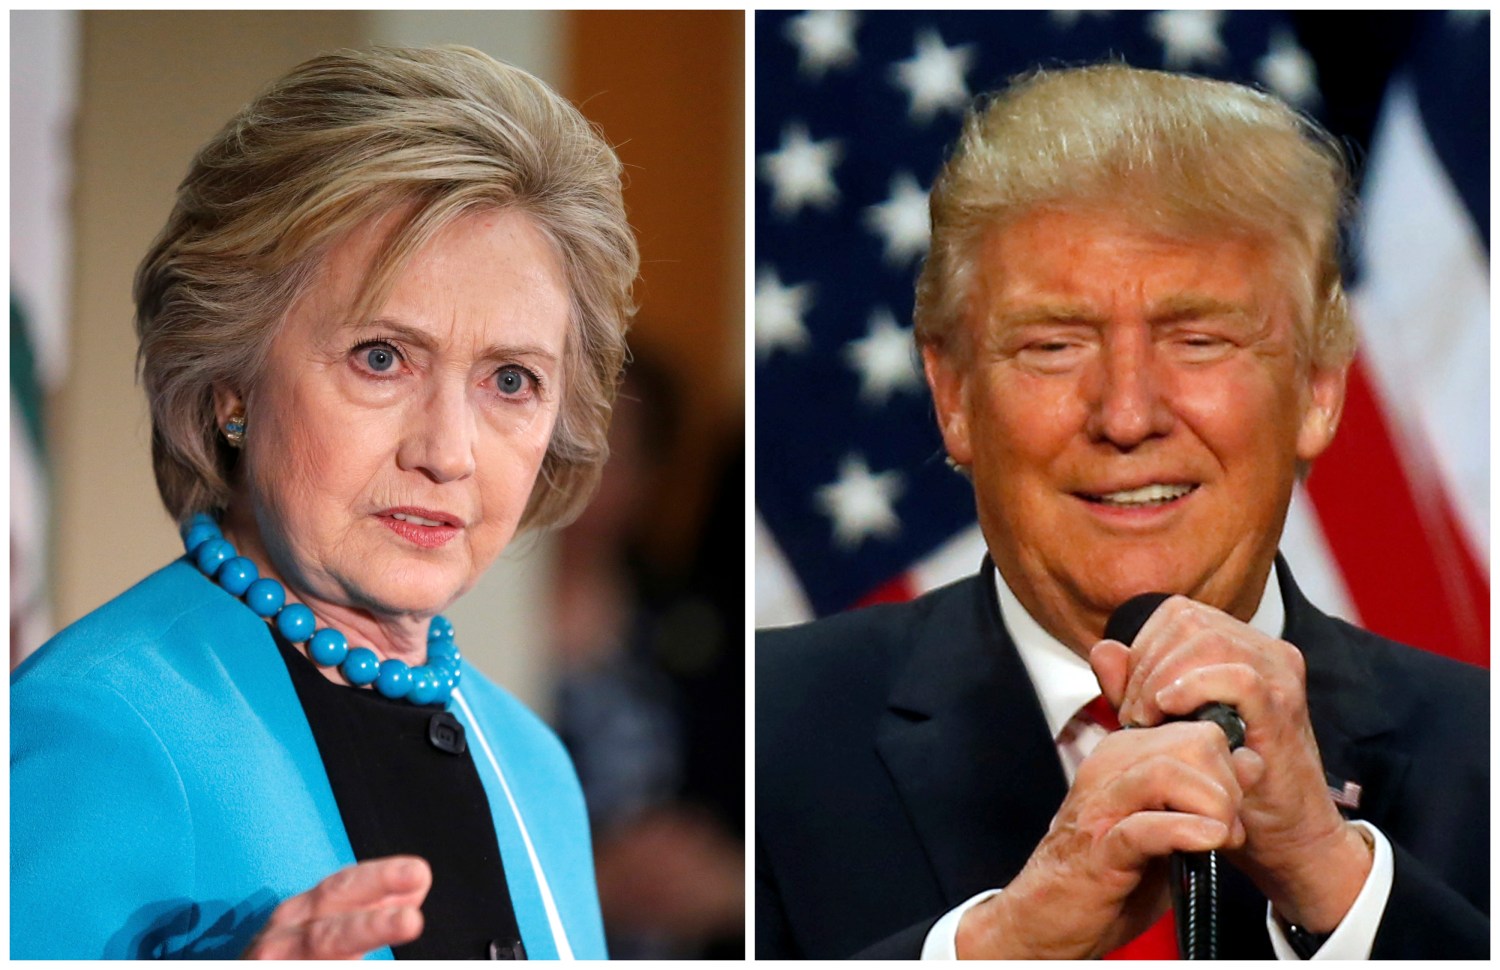 A combination photo shows U.S. Democratic presidential candidate Hillary Clinton (L) and Republican U.S. presidential candidate Donald Trump (R) in Los Angeles,